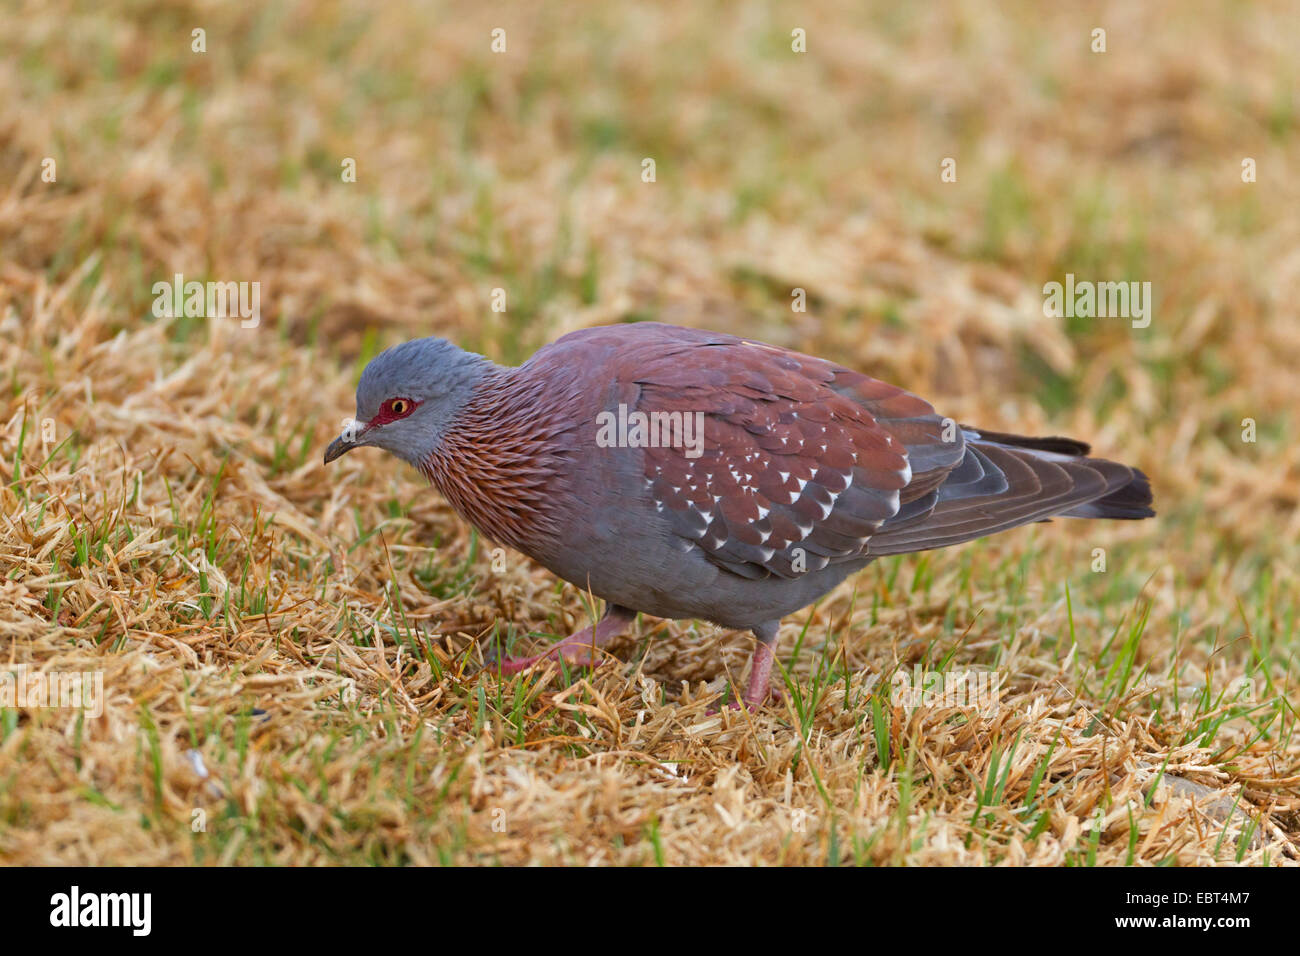 speckled pigeon (Columba guinea), sitting on the ground, South Africa, Kwazulu-Natal Stock Photo